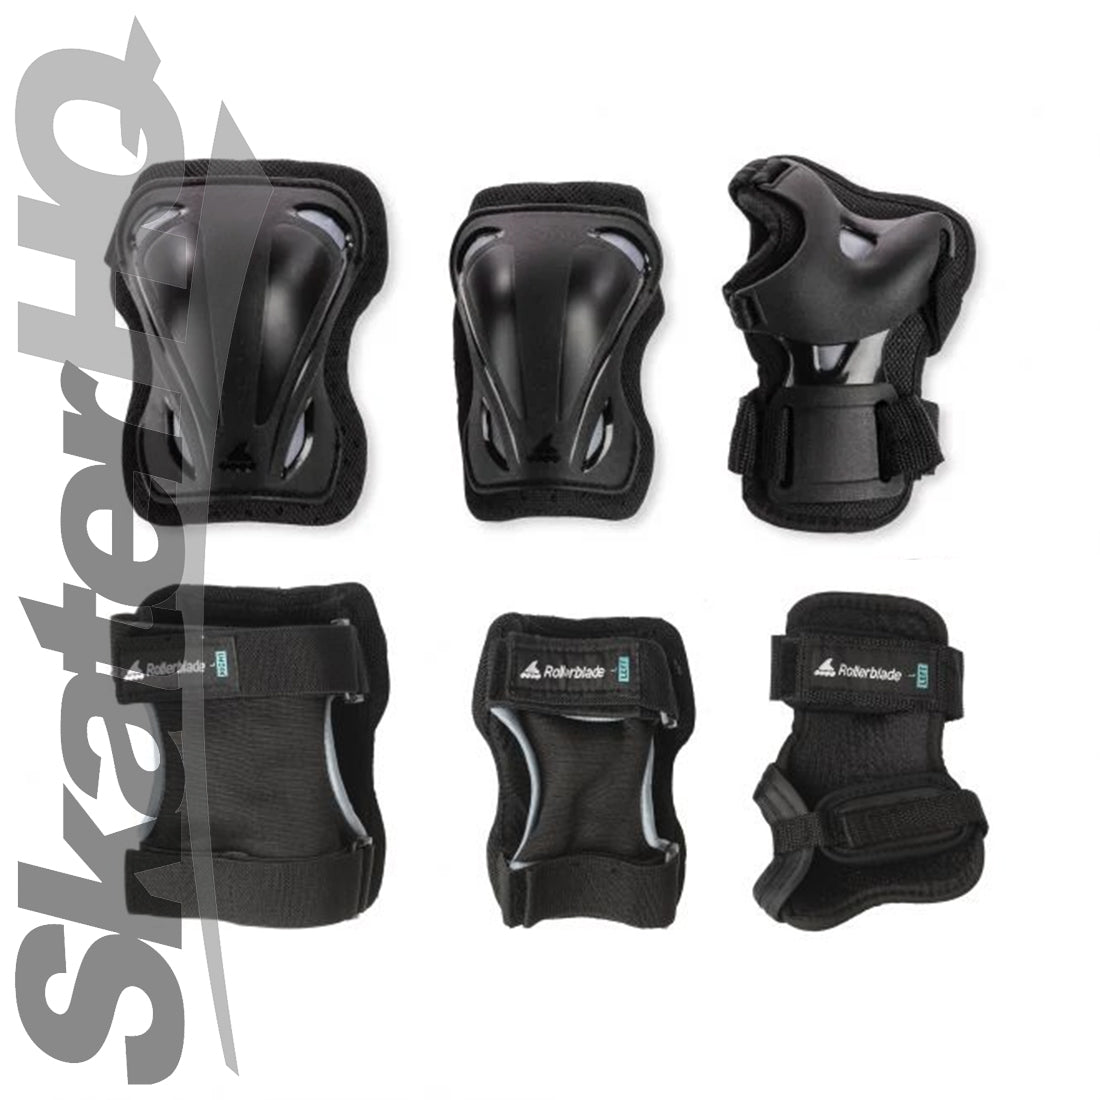 Rollerblade Skate Gear 3pk - Small Protective Gear